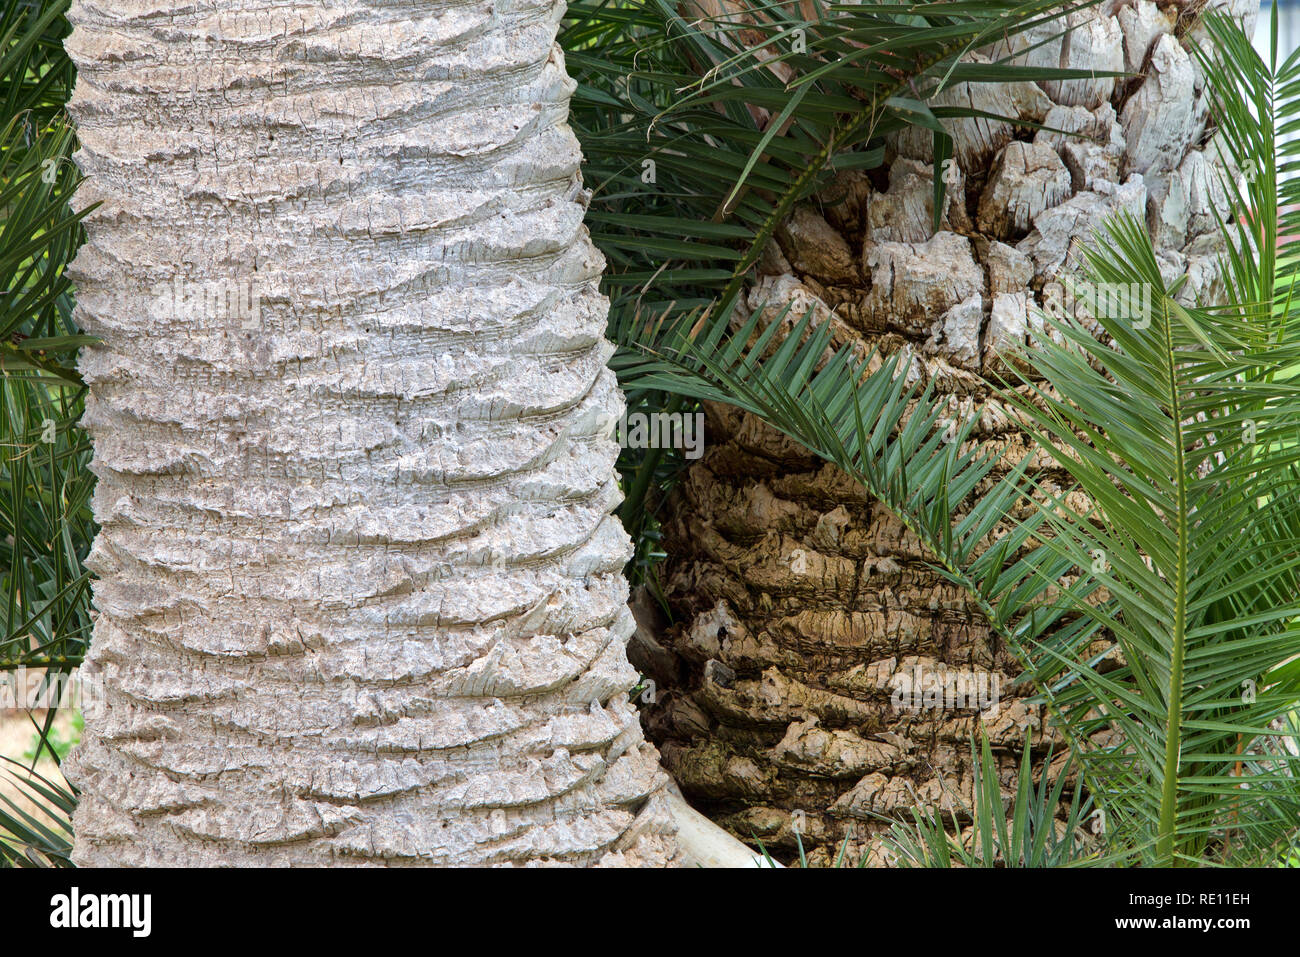 Close up on the trunks of two queen palm trees side by side. One trimmed pruned the other ragged with suckers growing from below. Stock Photo